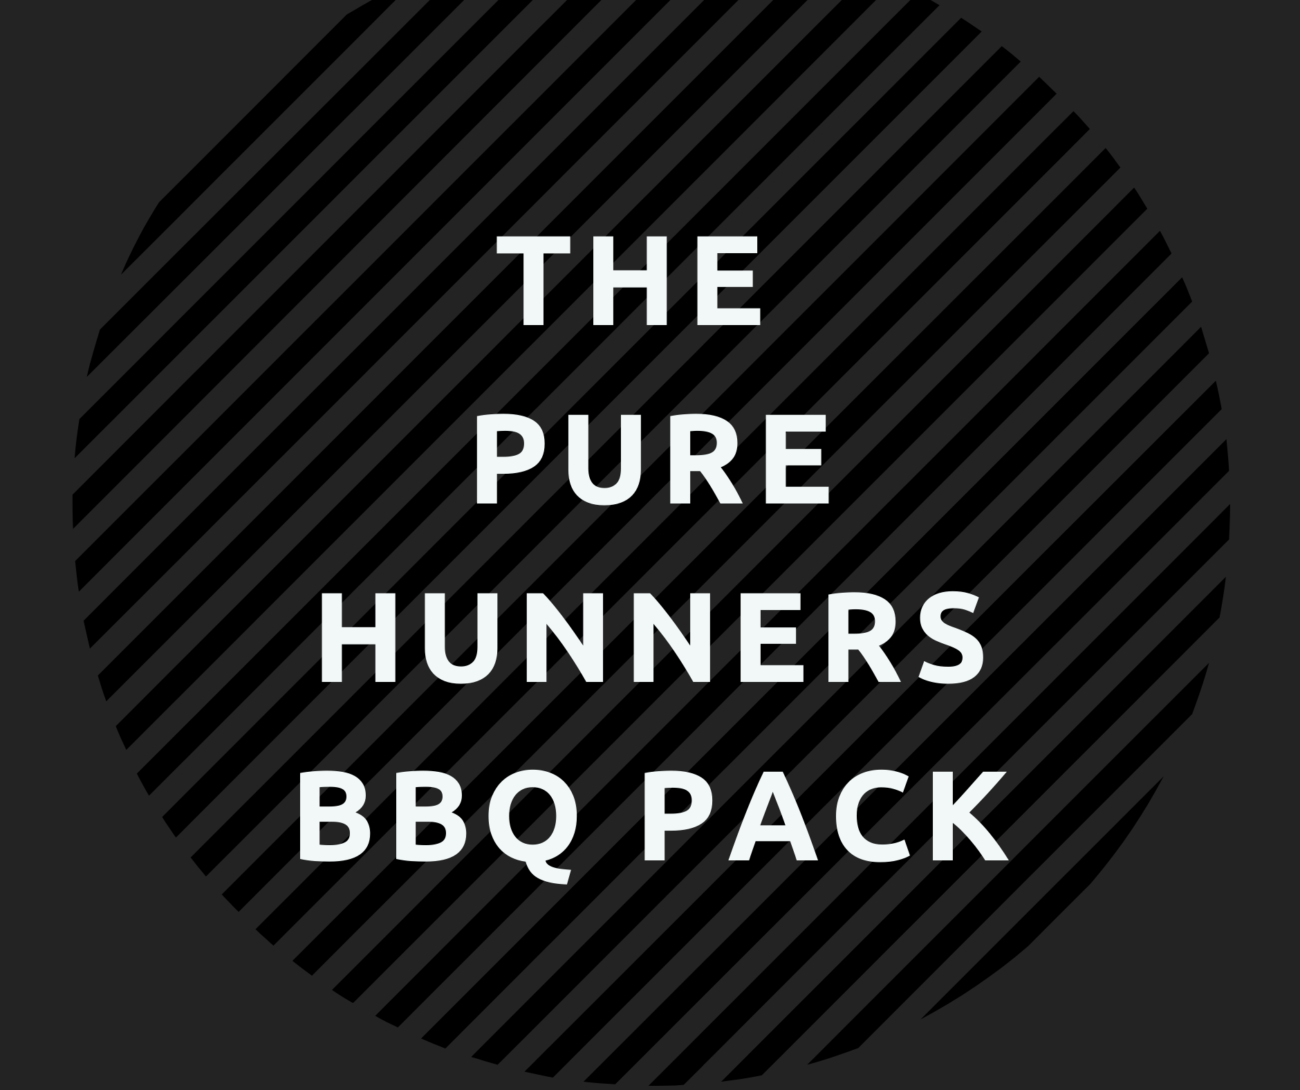 The pure hanners bbq pack